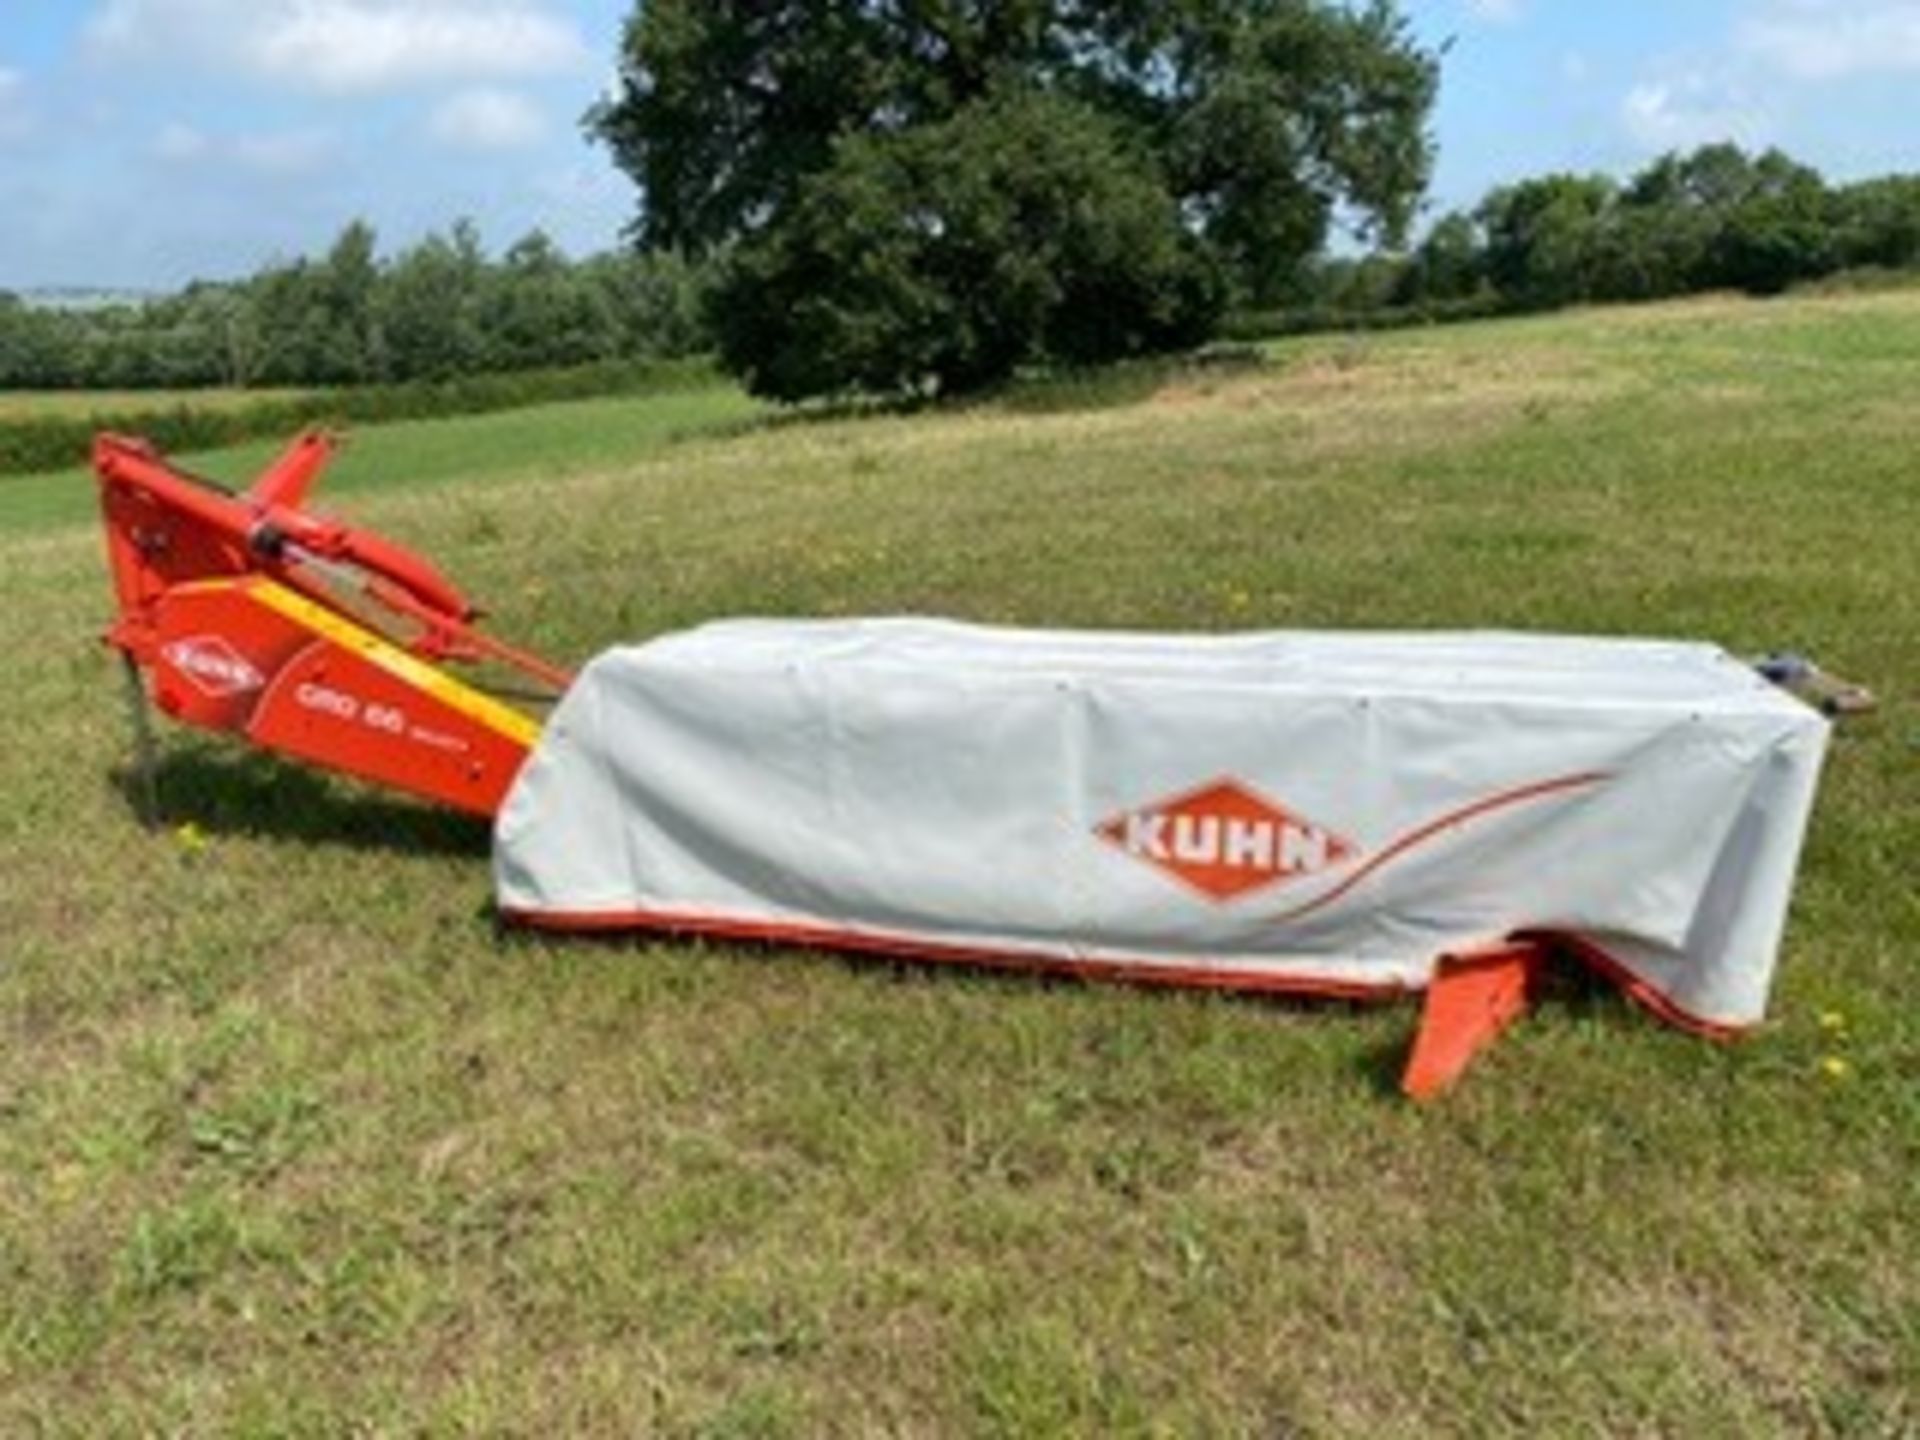 KUHN GMD 66 8FT DISC MOWER (2014) - Image 2 of 4